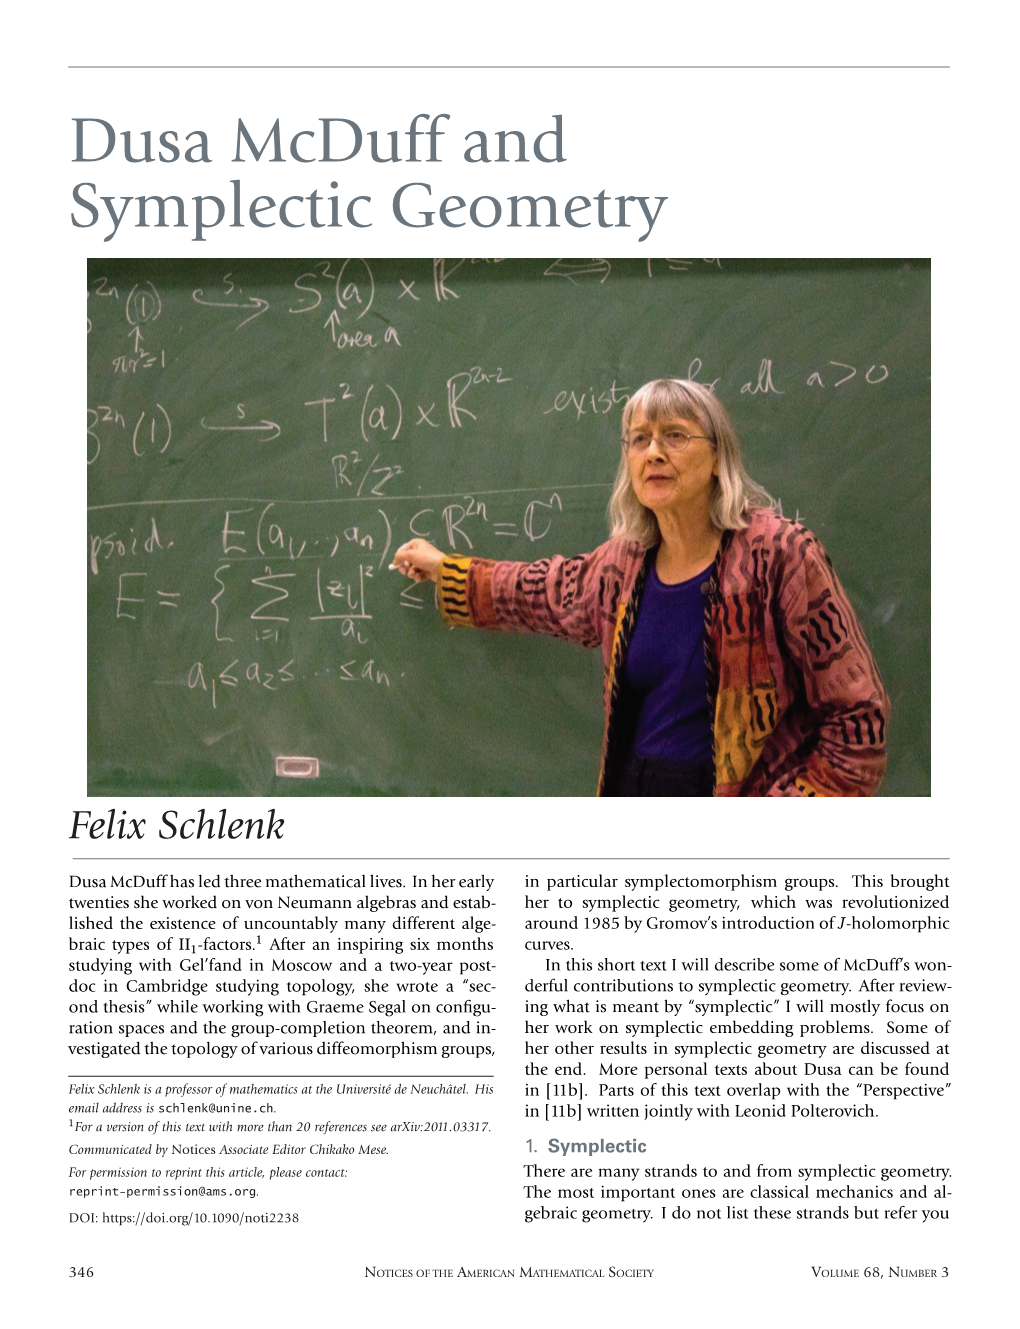 Dusa Mcduff and Symplectic Geometry